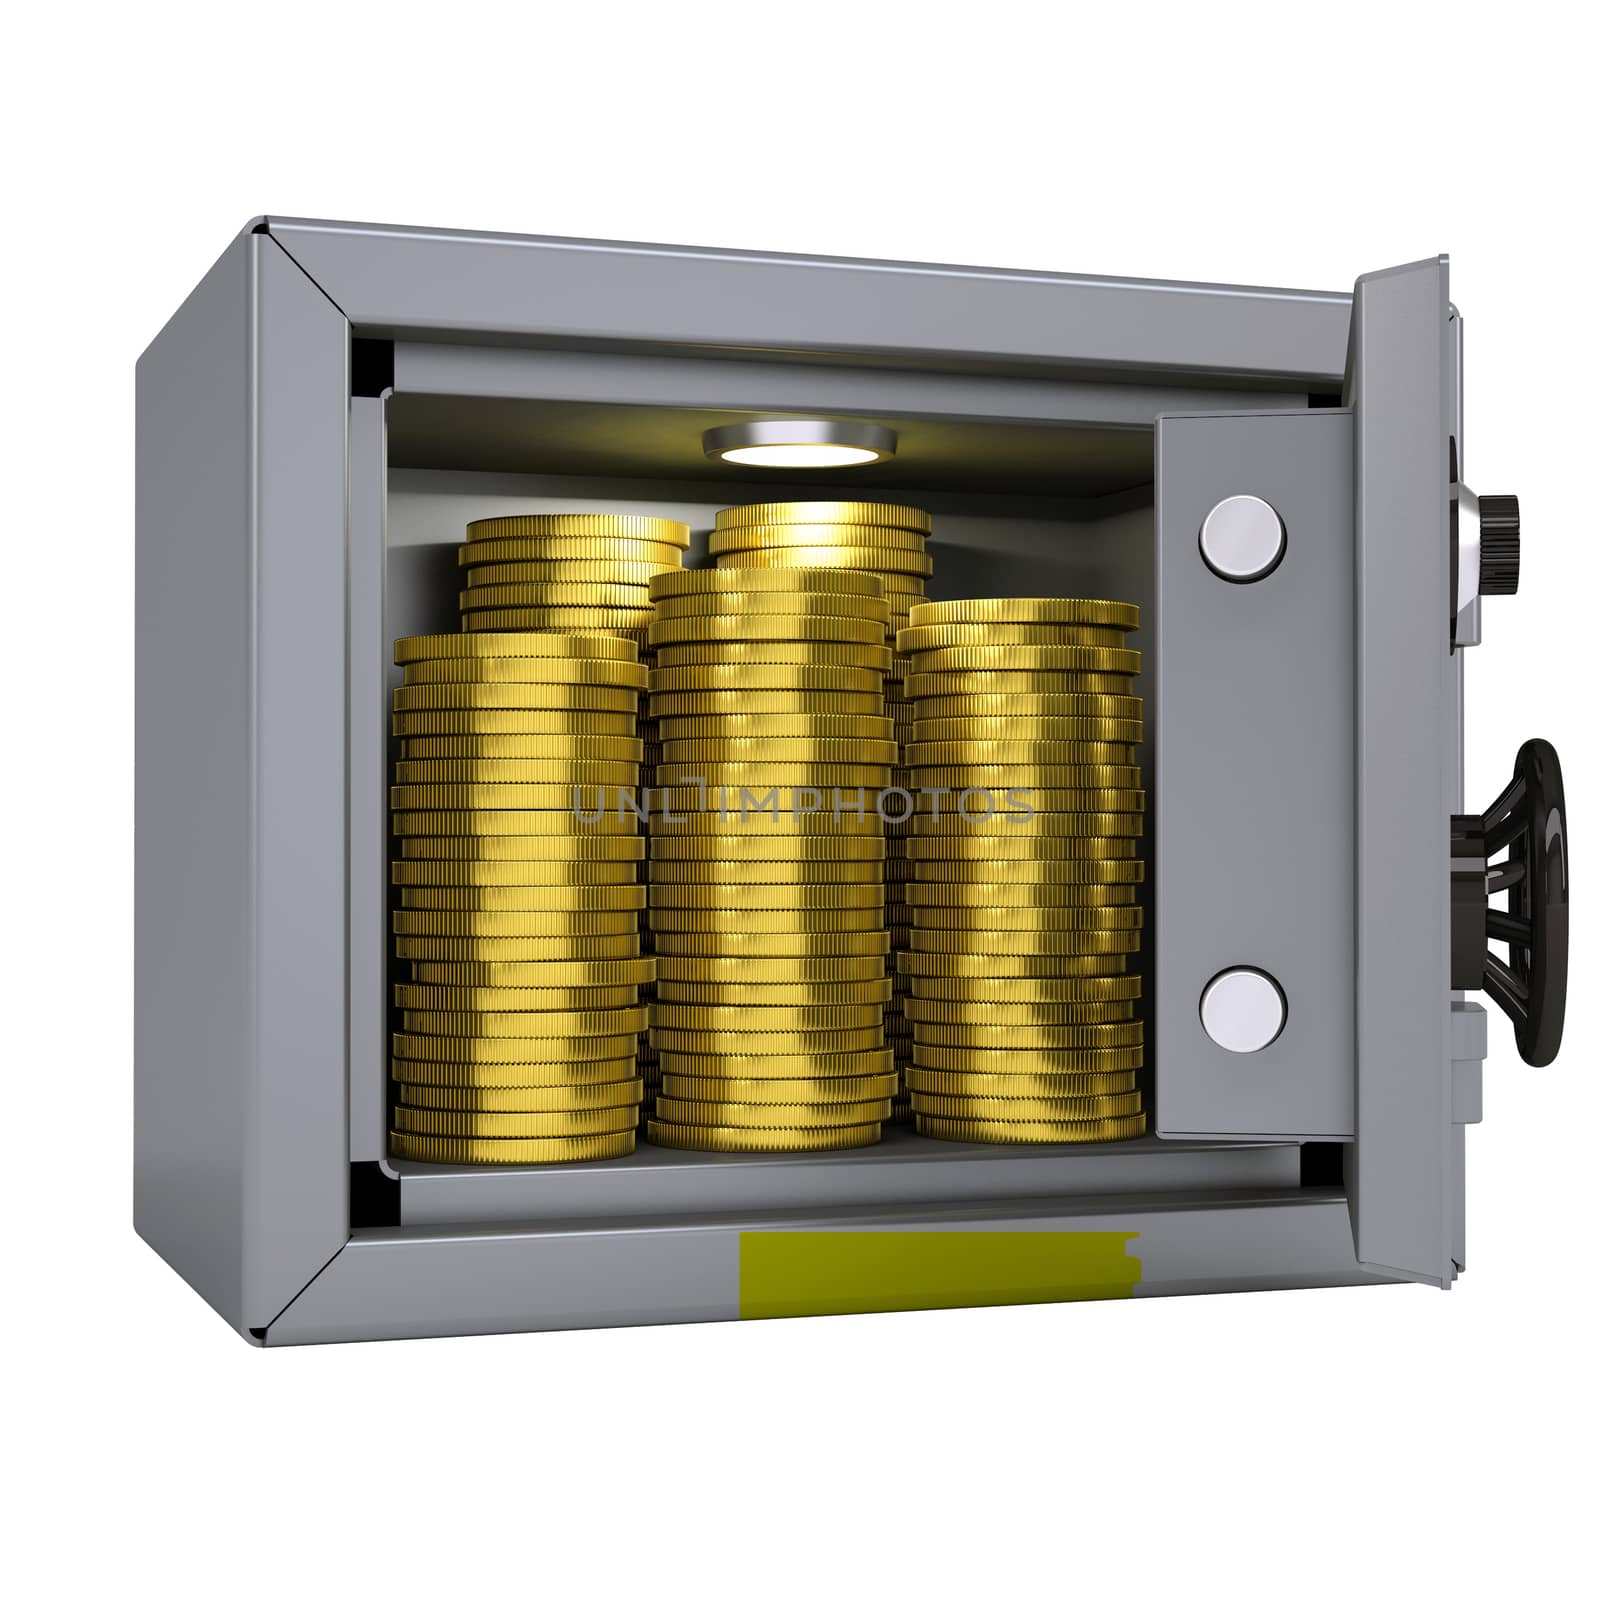 Gold coins in a safe. Isolated render on a white background